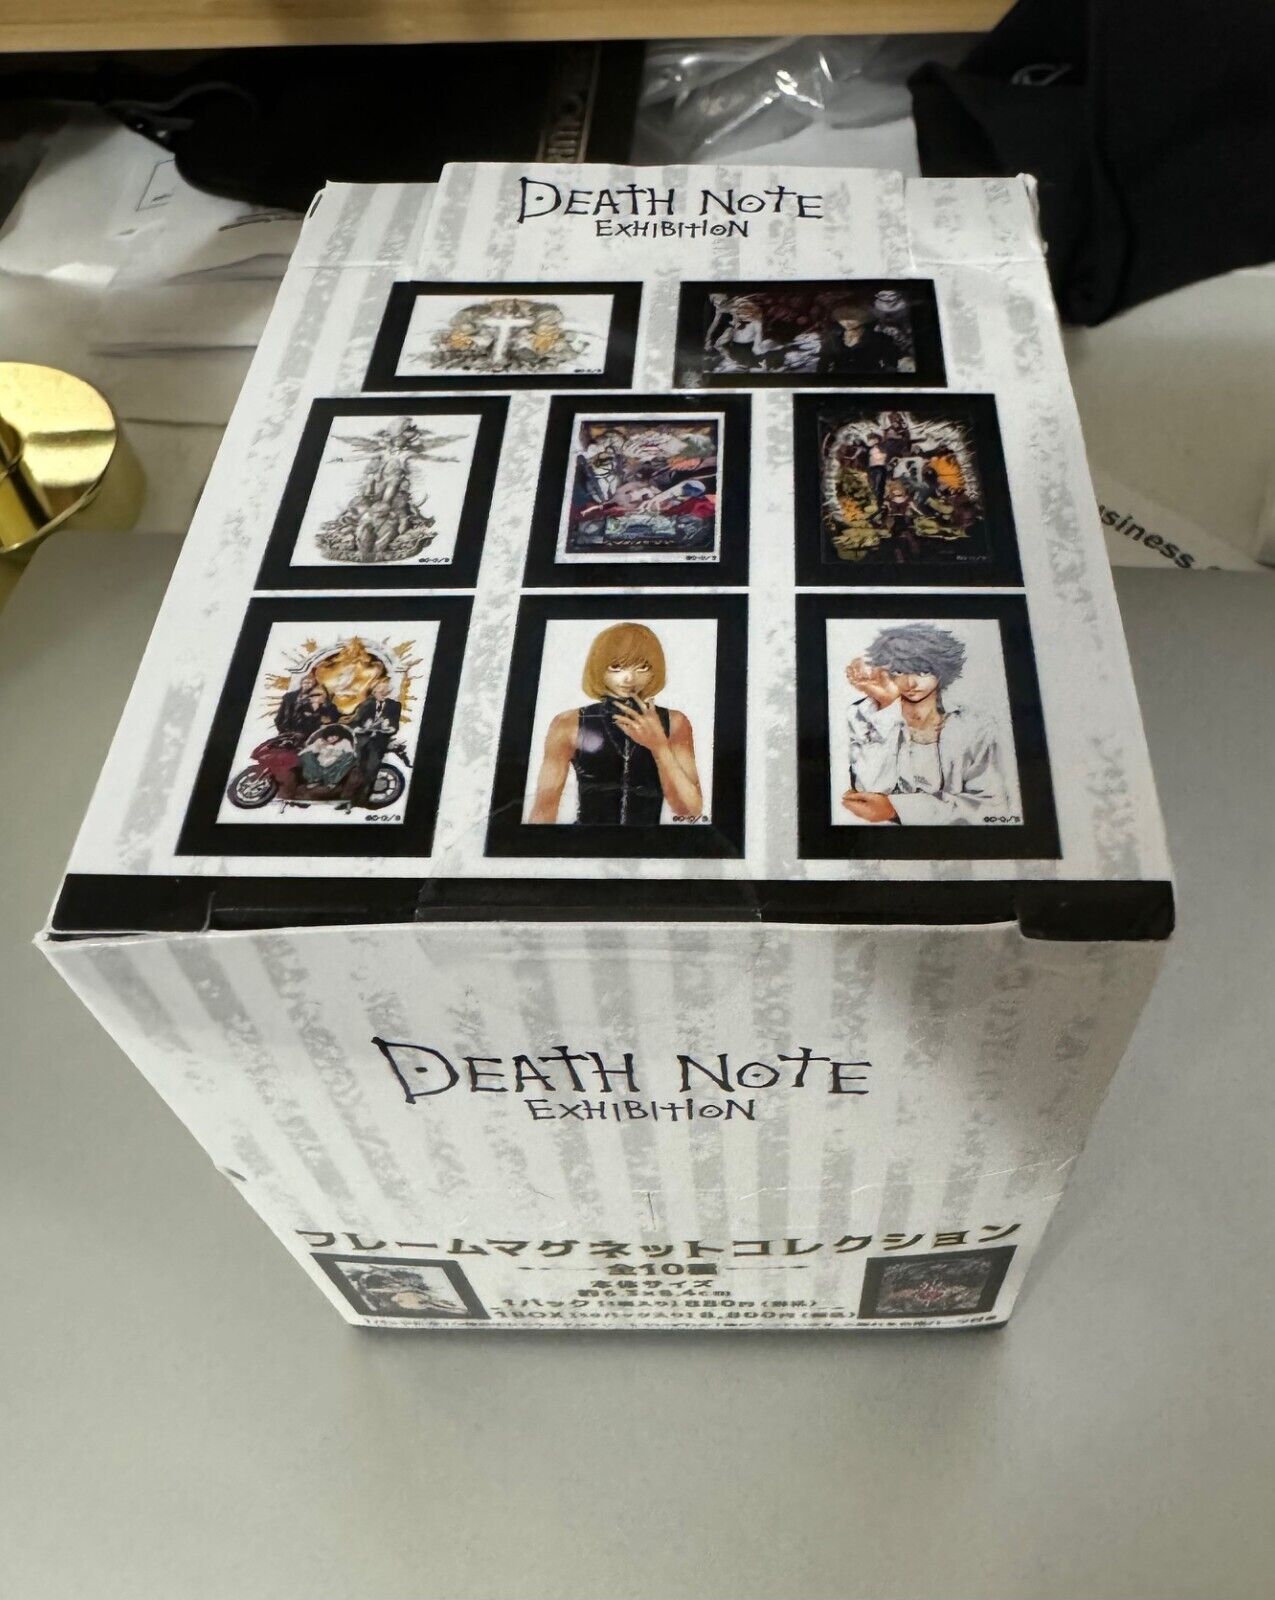 Death Note Exhibition Acrylic Magnet 1BOX contains 10 Art Magnets 